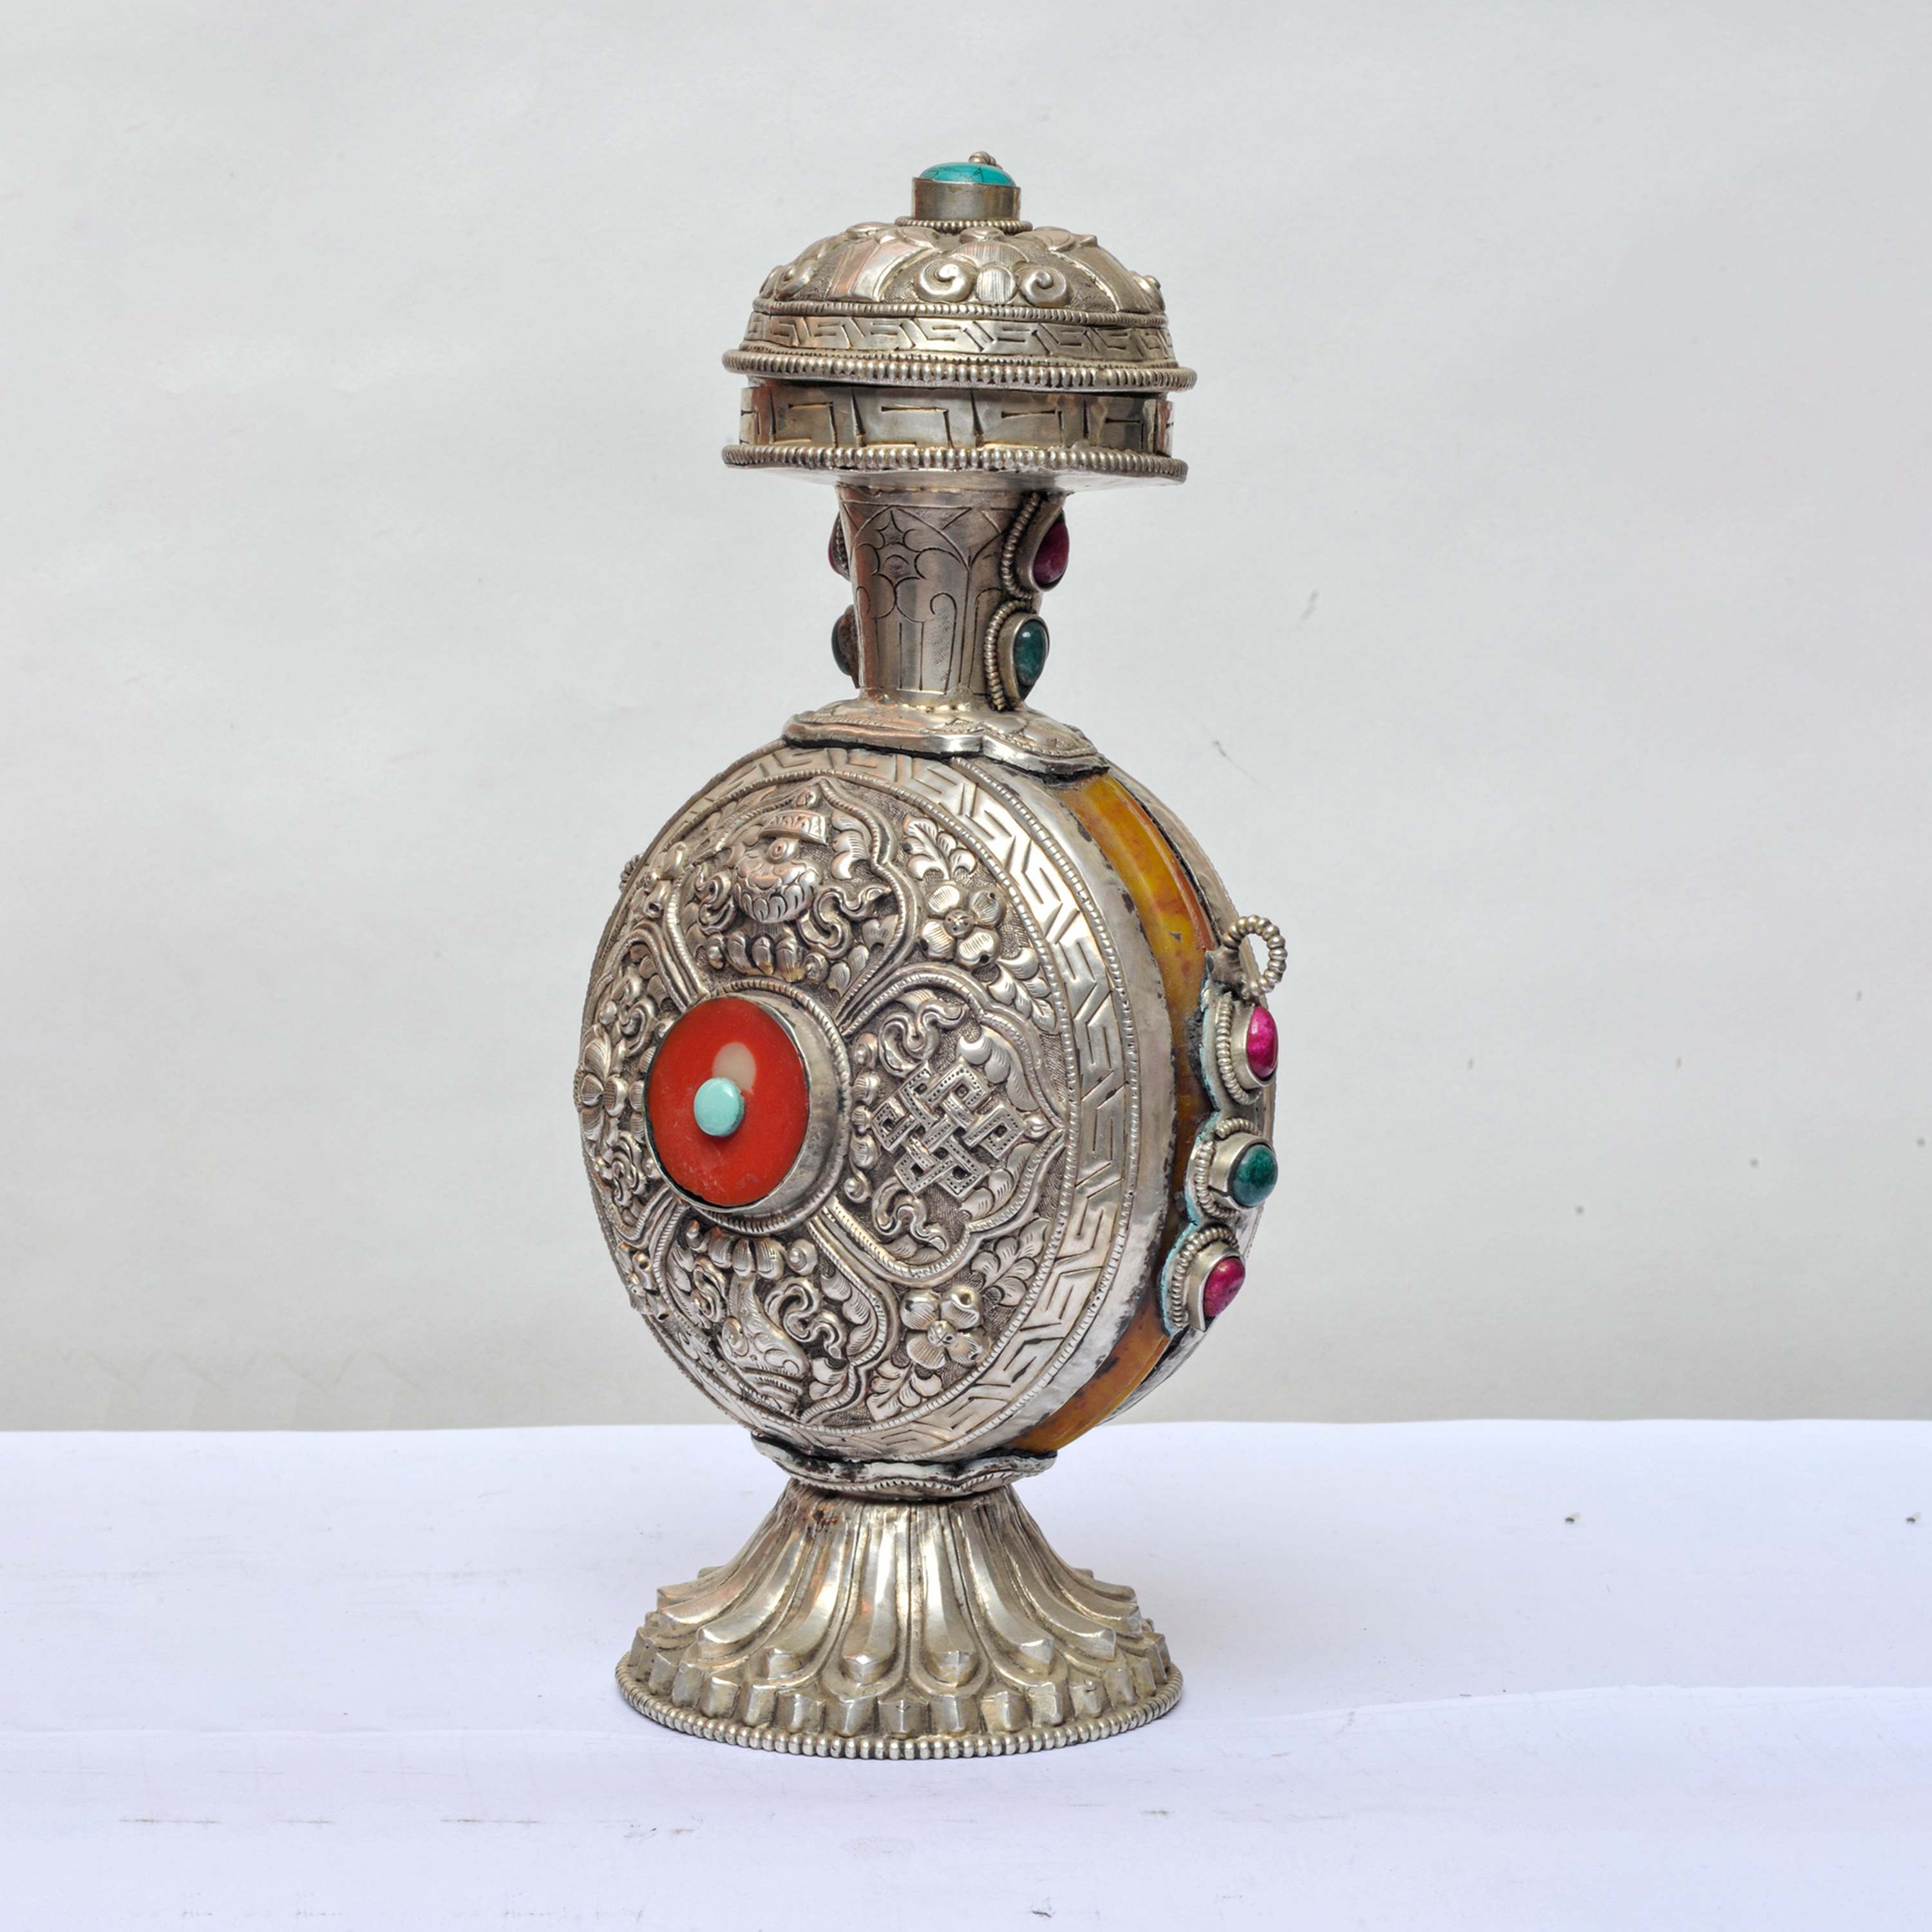 Copper Flower Snuff Bottle With And Jade Stone, Silver And Copper Plated With Stone Setting, silver Carving